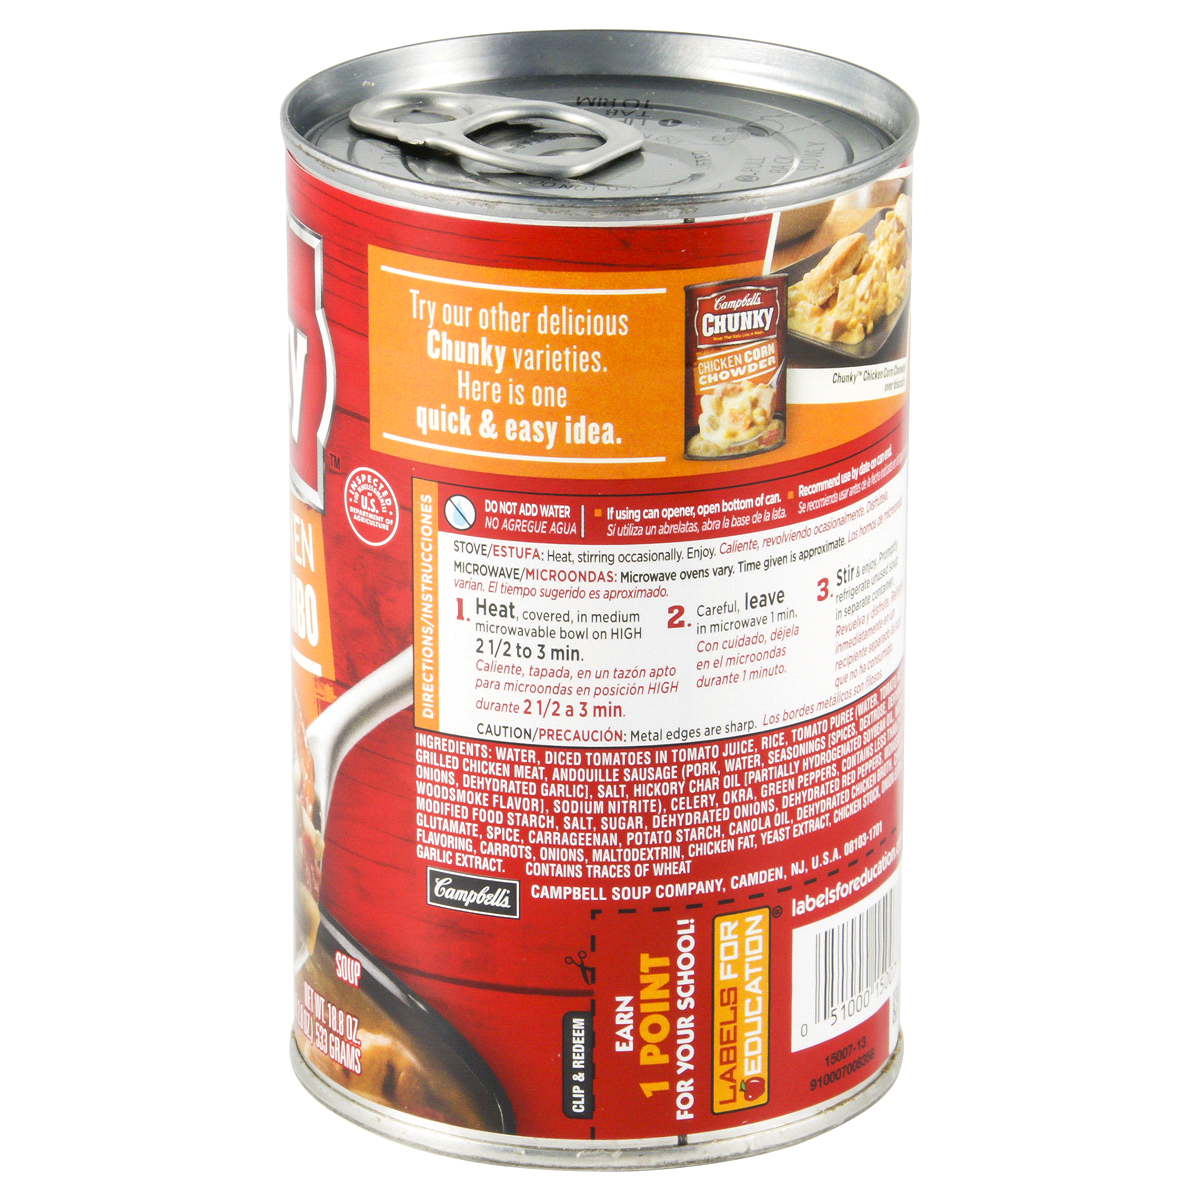 slide 44 of 80, Campbell's Chunky Grilled Chicken & Sausage Gumbo Soup, 18.8 oz